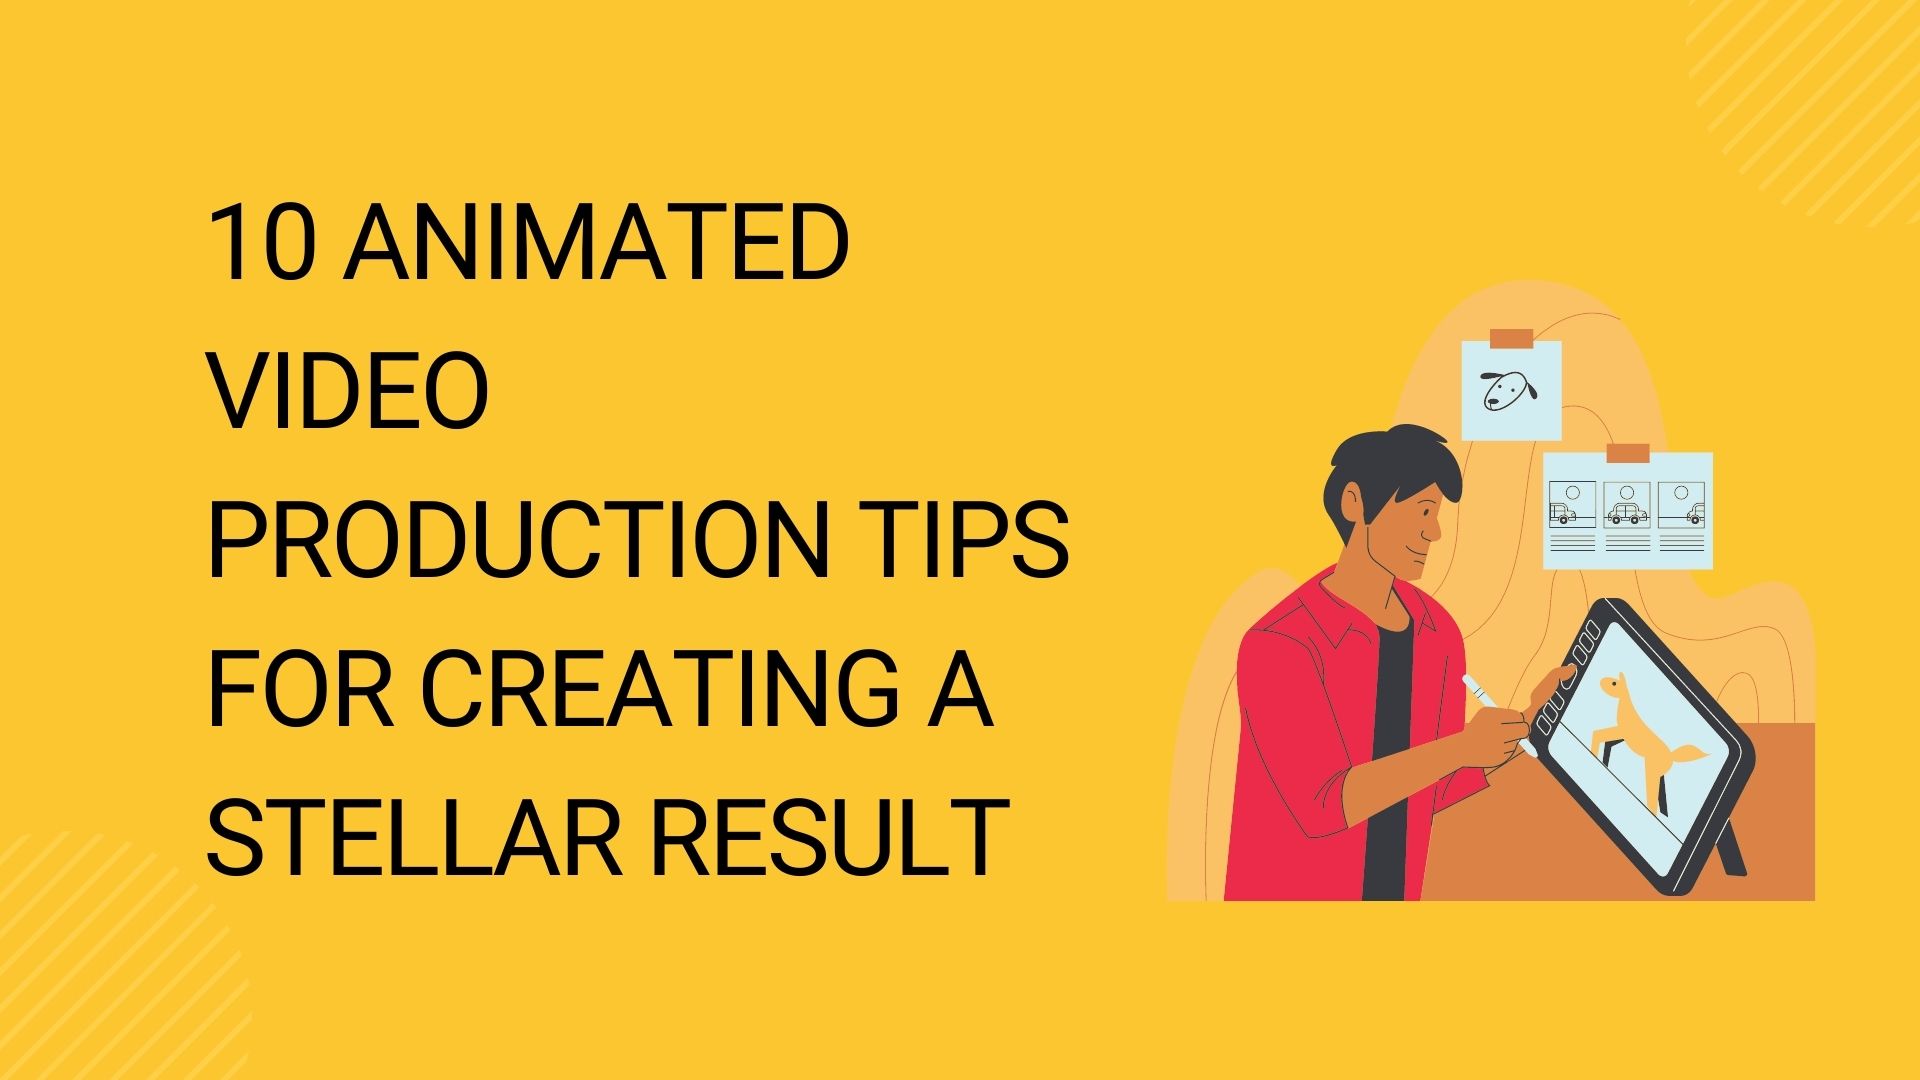 Animated Video Production